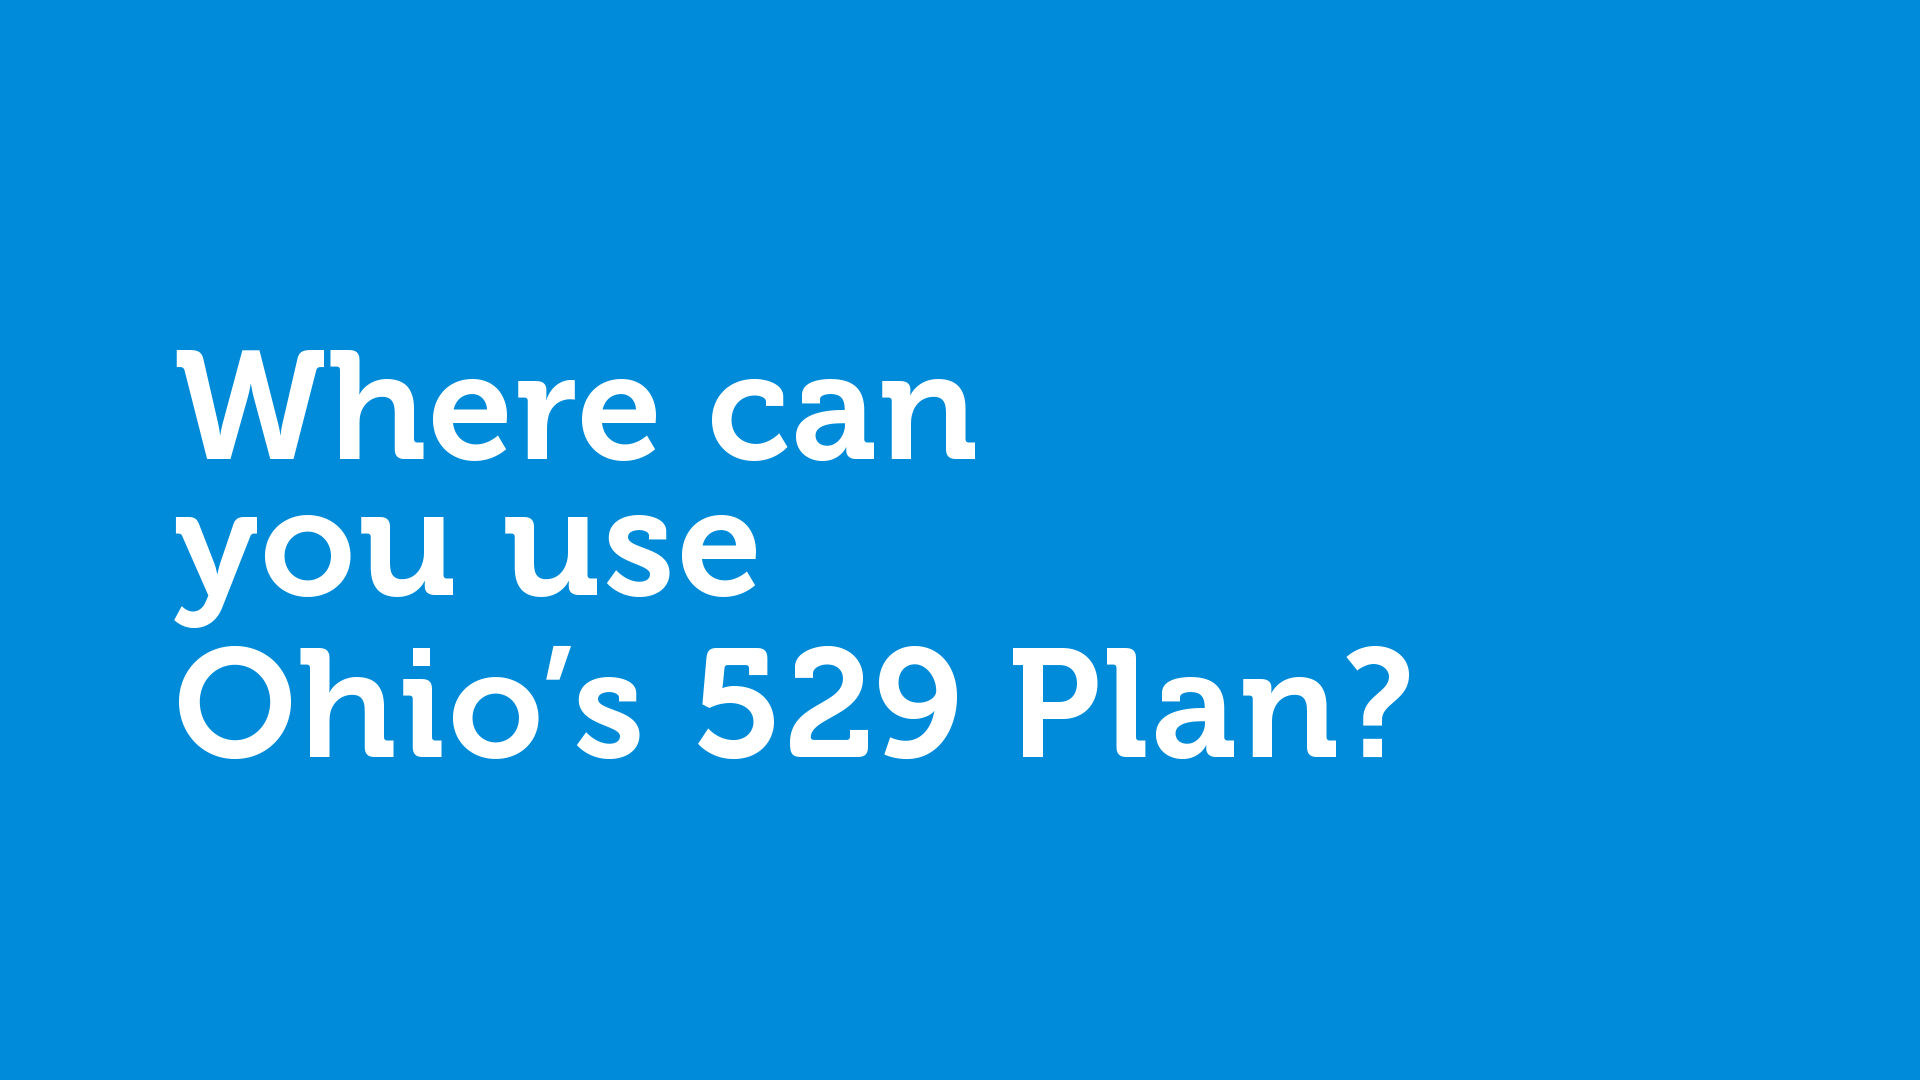 Key frame of video with title Where can you use Ohio's 529 Plan?